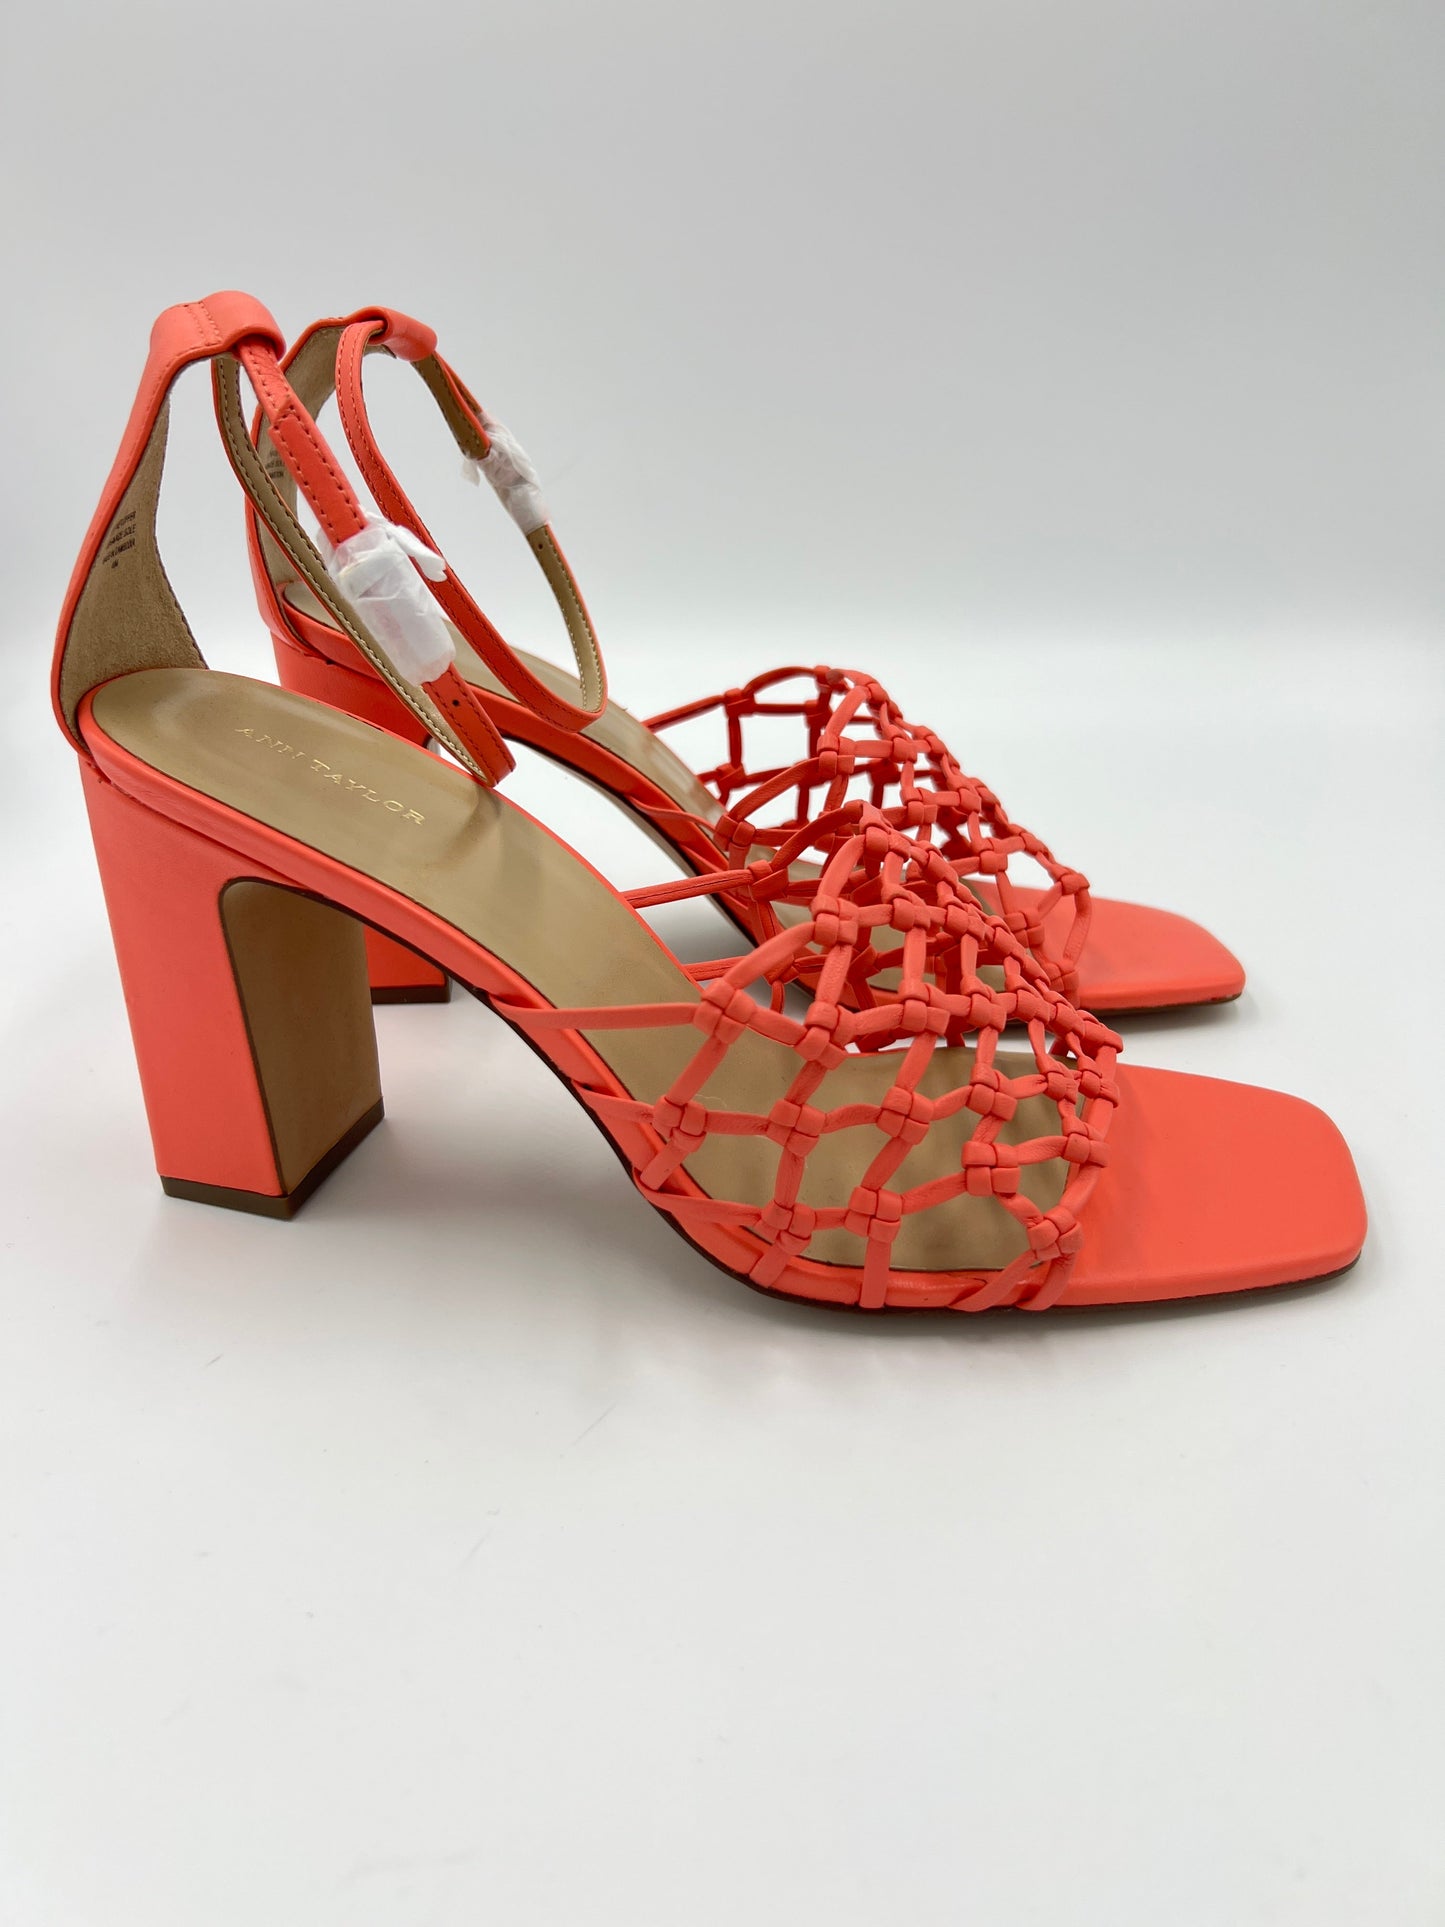 NEW! Shoes Heels Block Ann Taylor, Size 10